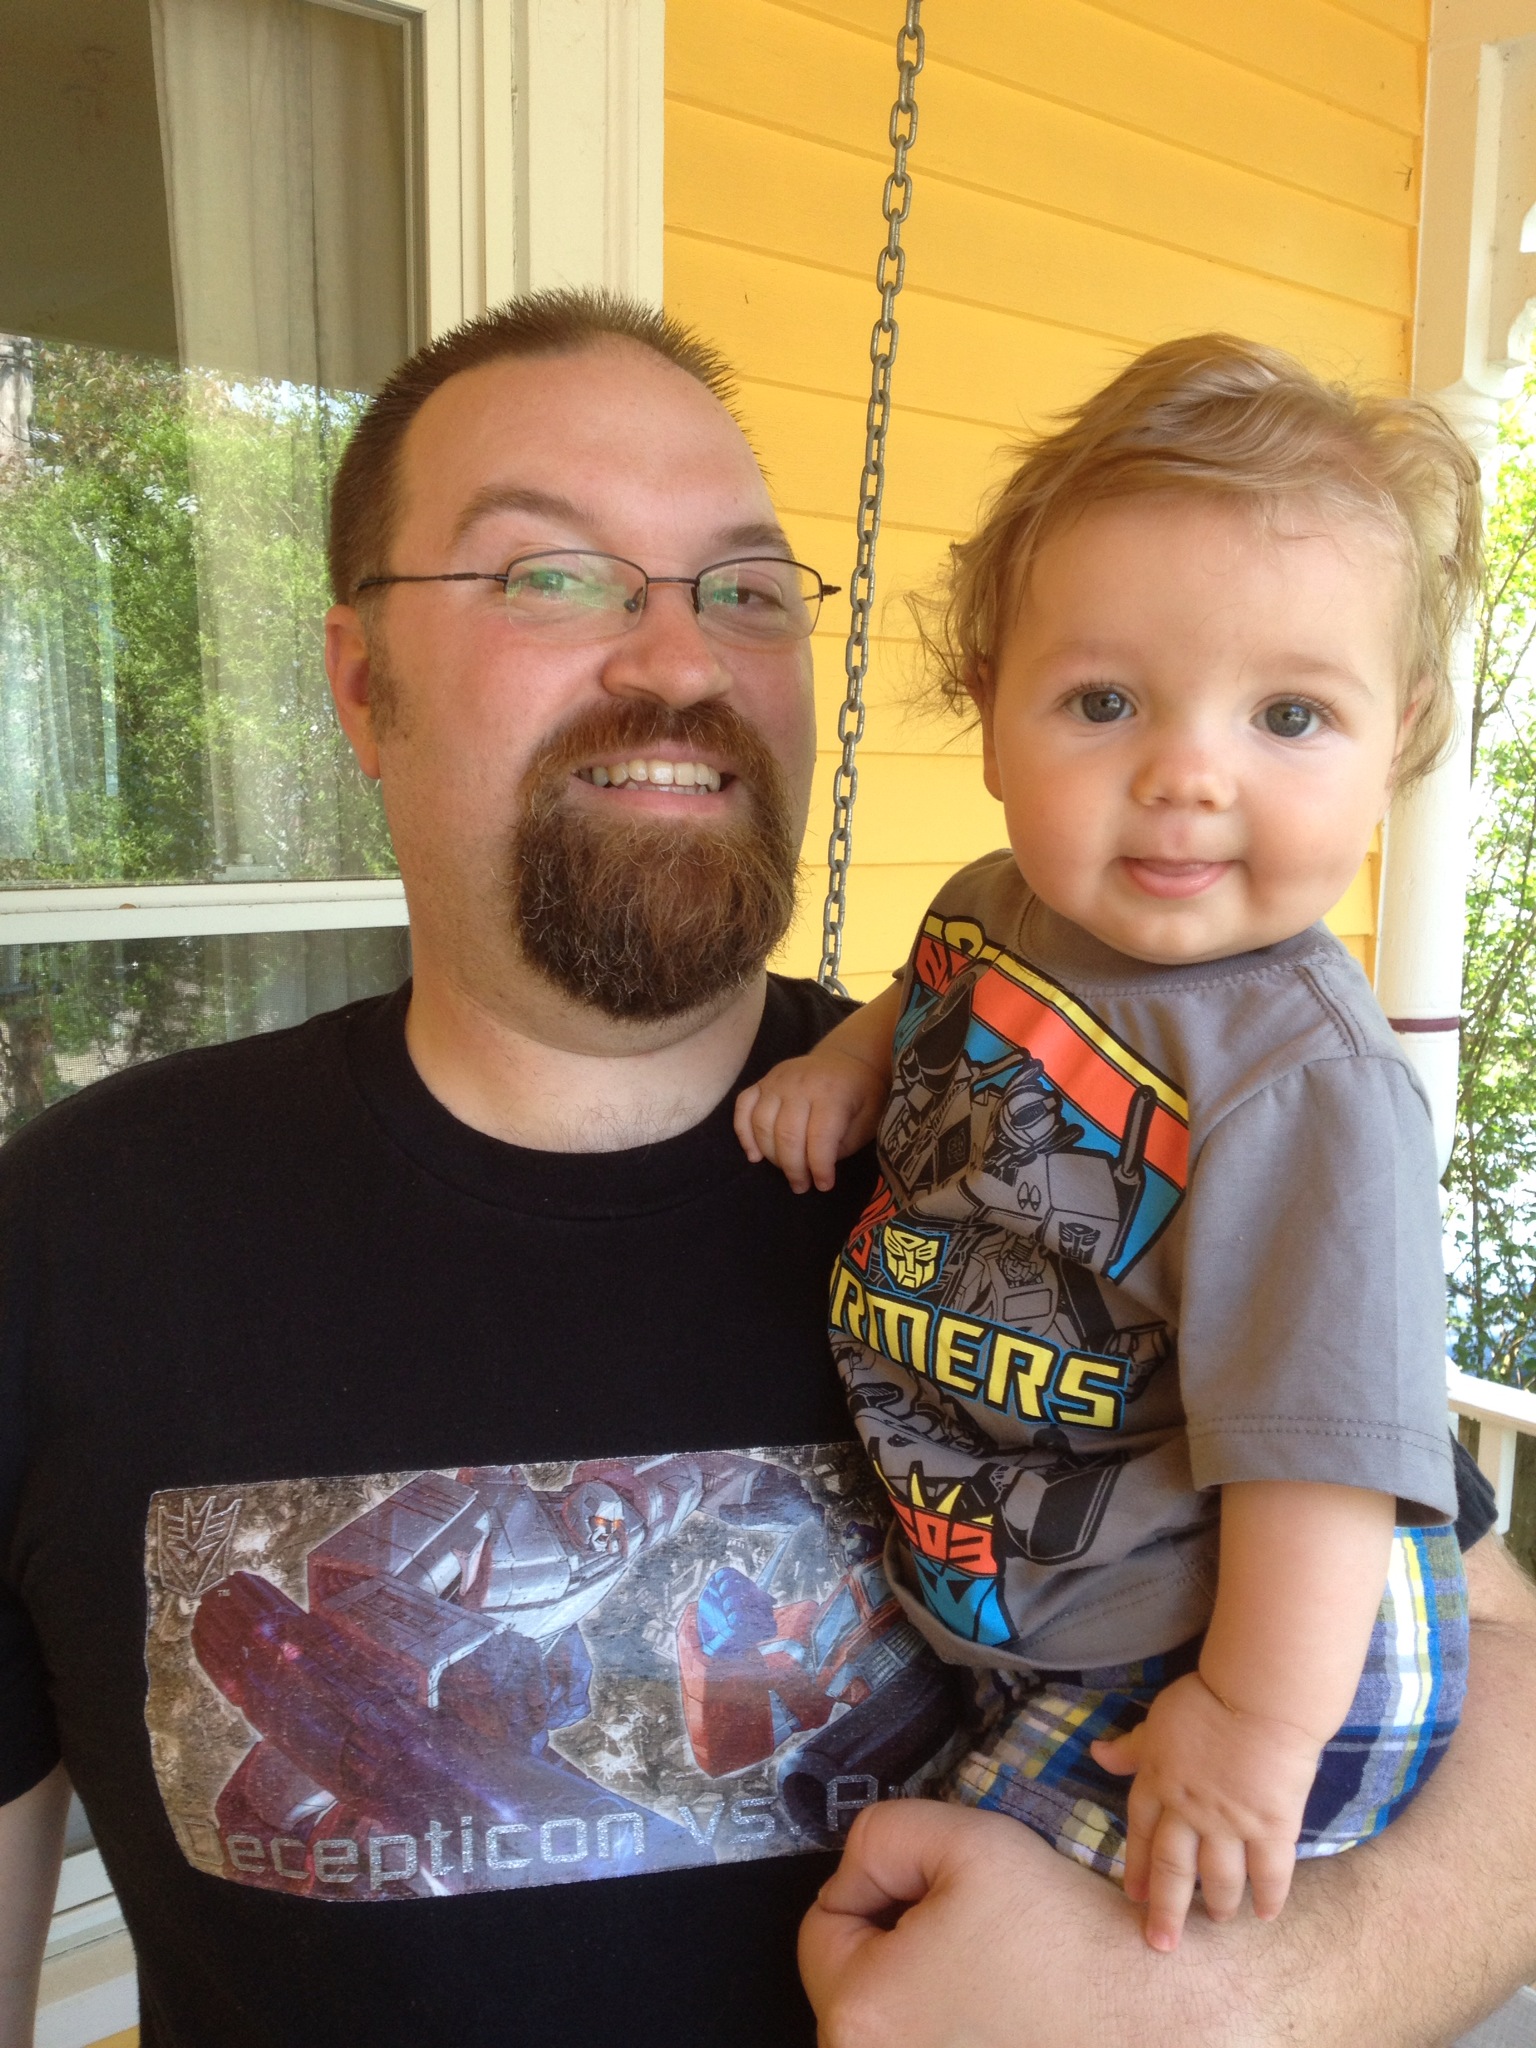 Geek Dad with his future Geek Son, Big Transformers Fans